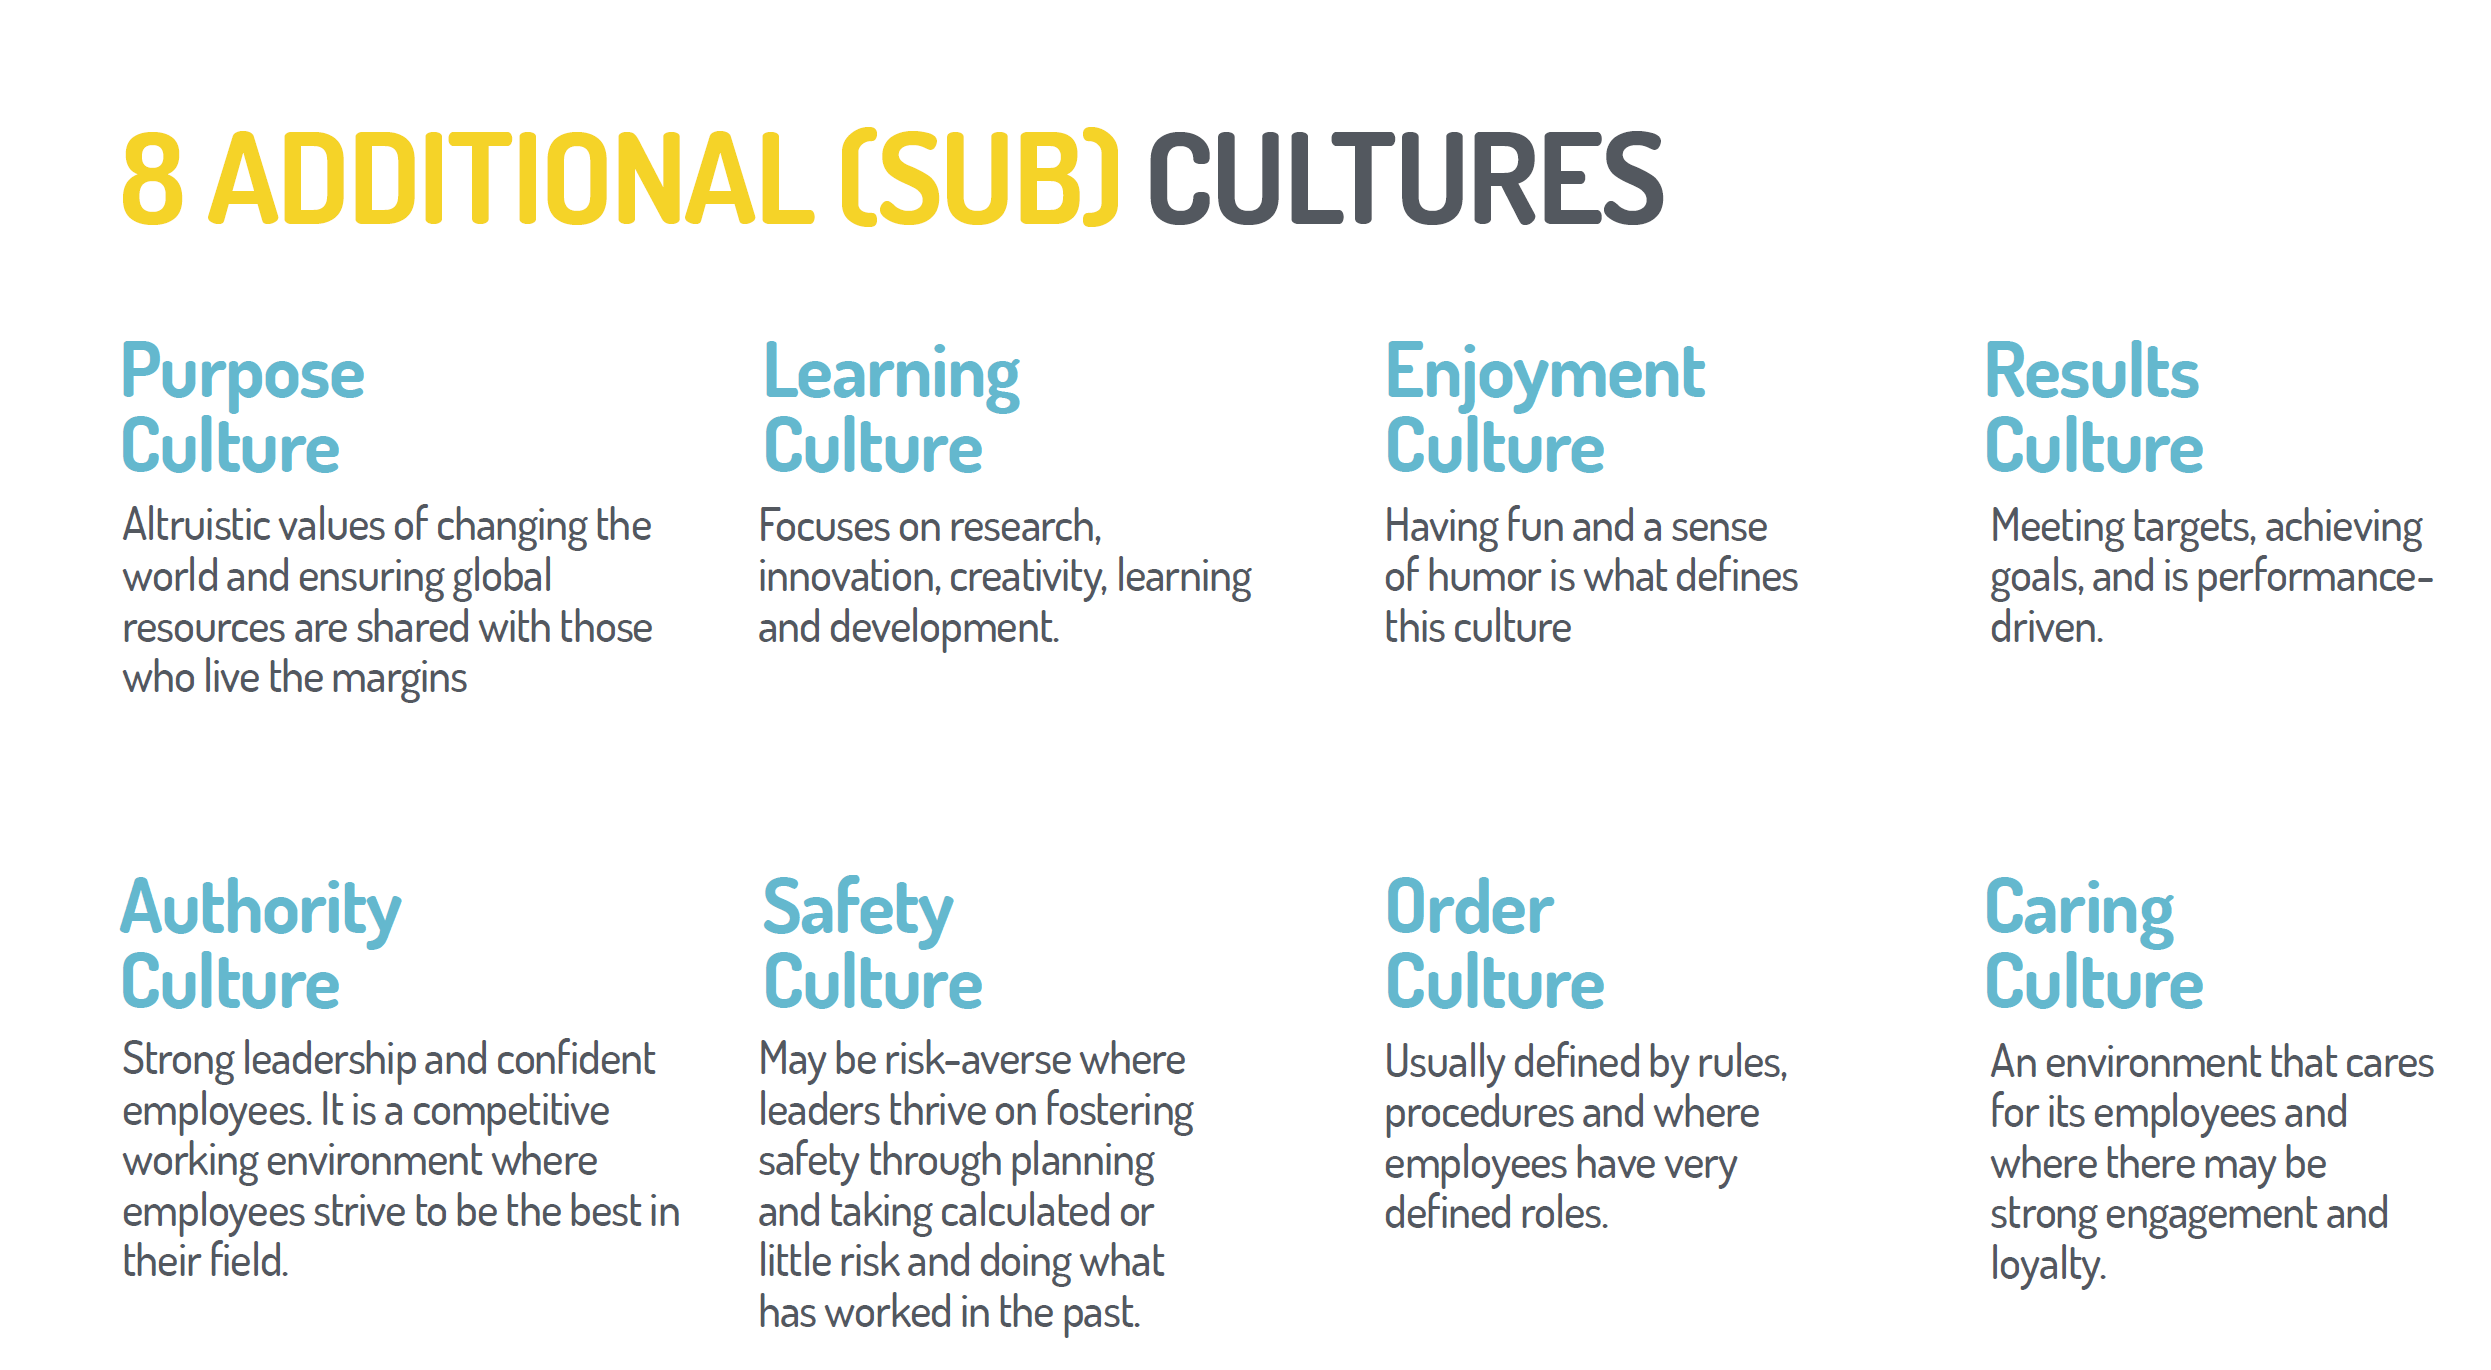 There are 8 sub cultures. These are Purpose, Learning, Enjoyment, Results, Authority, Safety, Order and Caring.